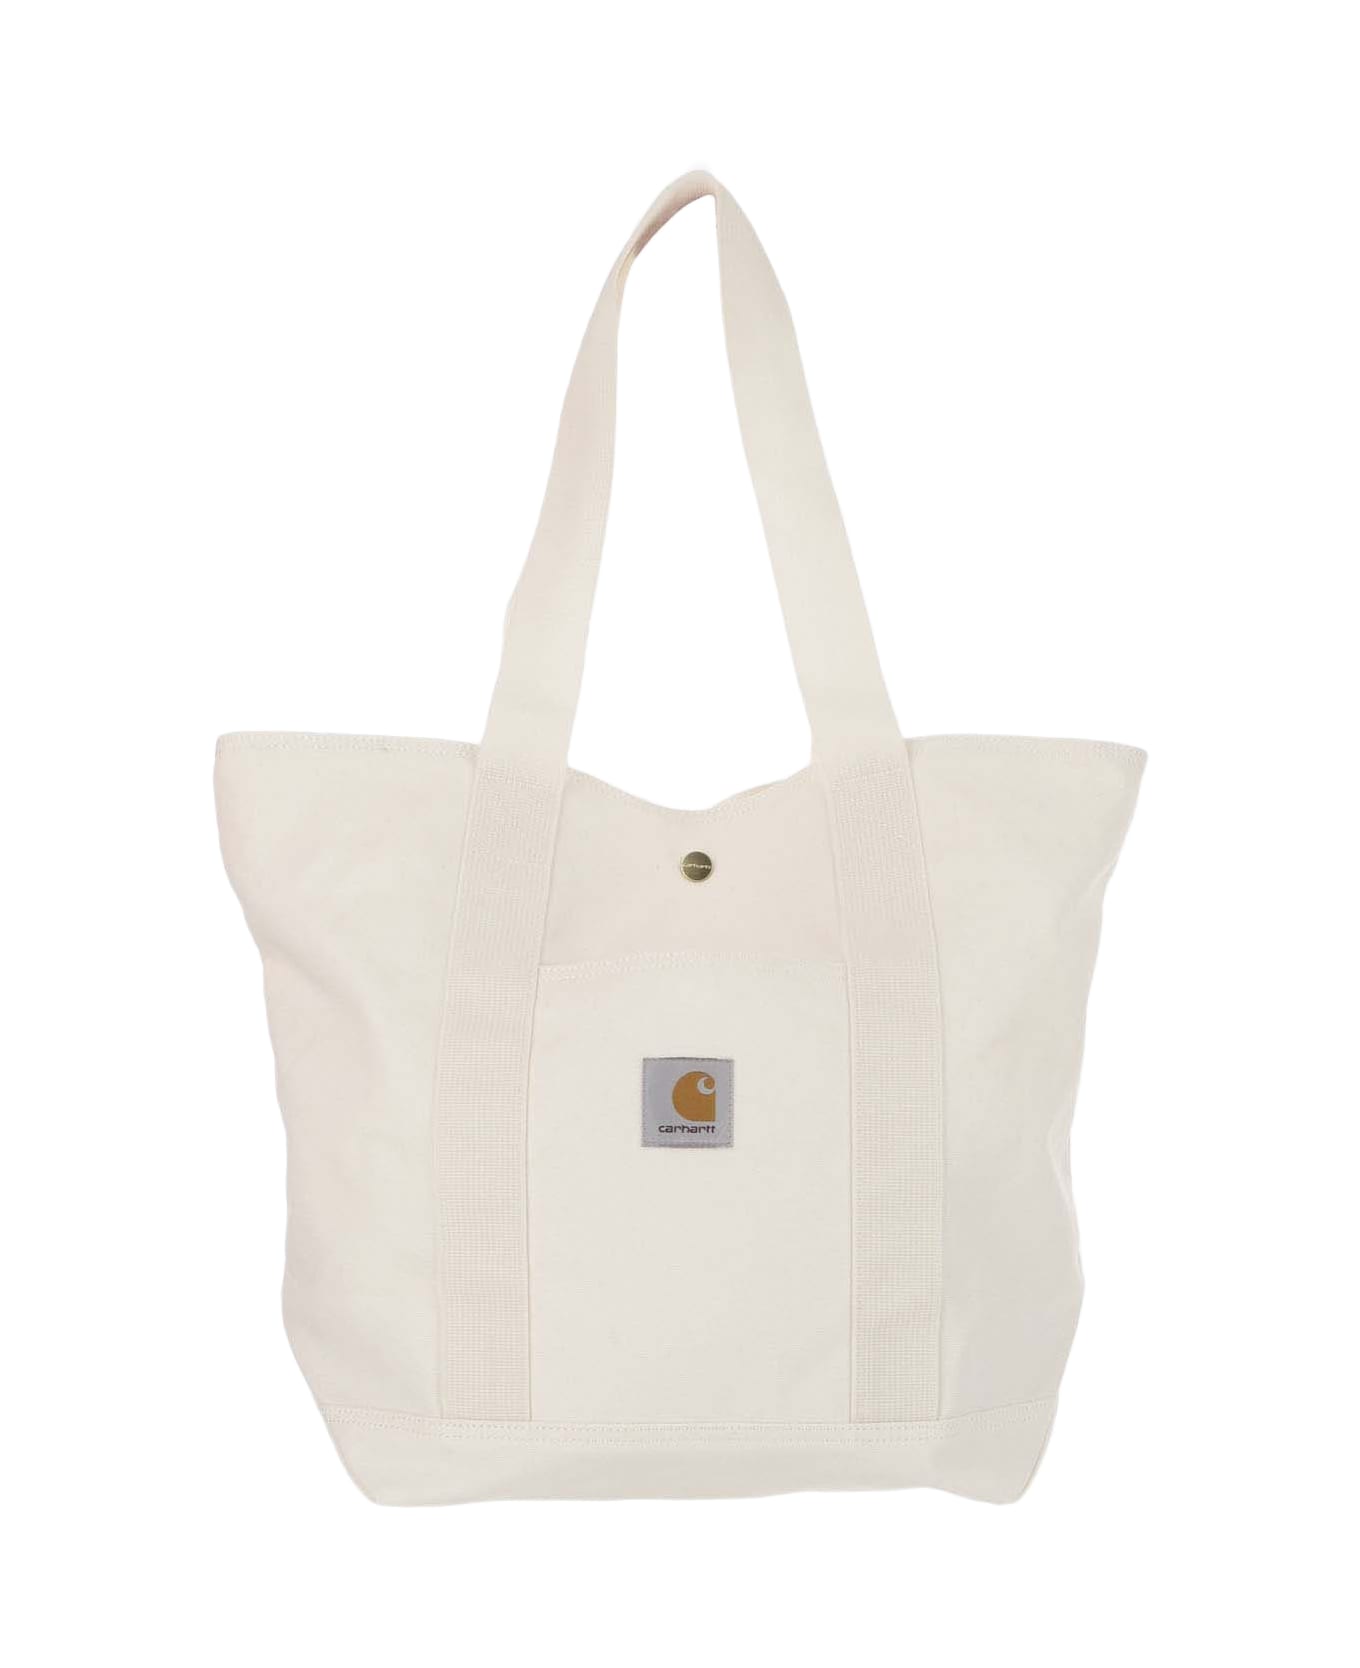 Carhartt Canvas Tote Bag With Logo - Ivory